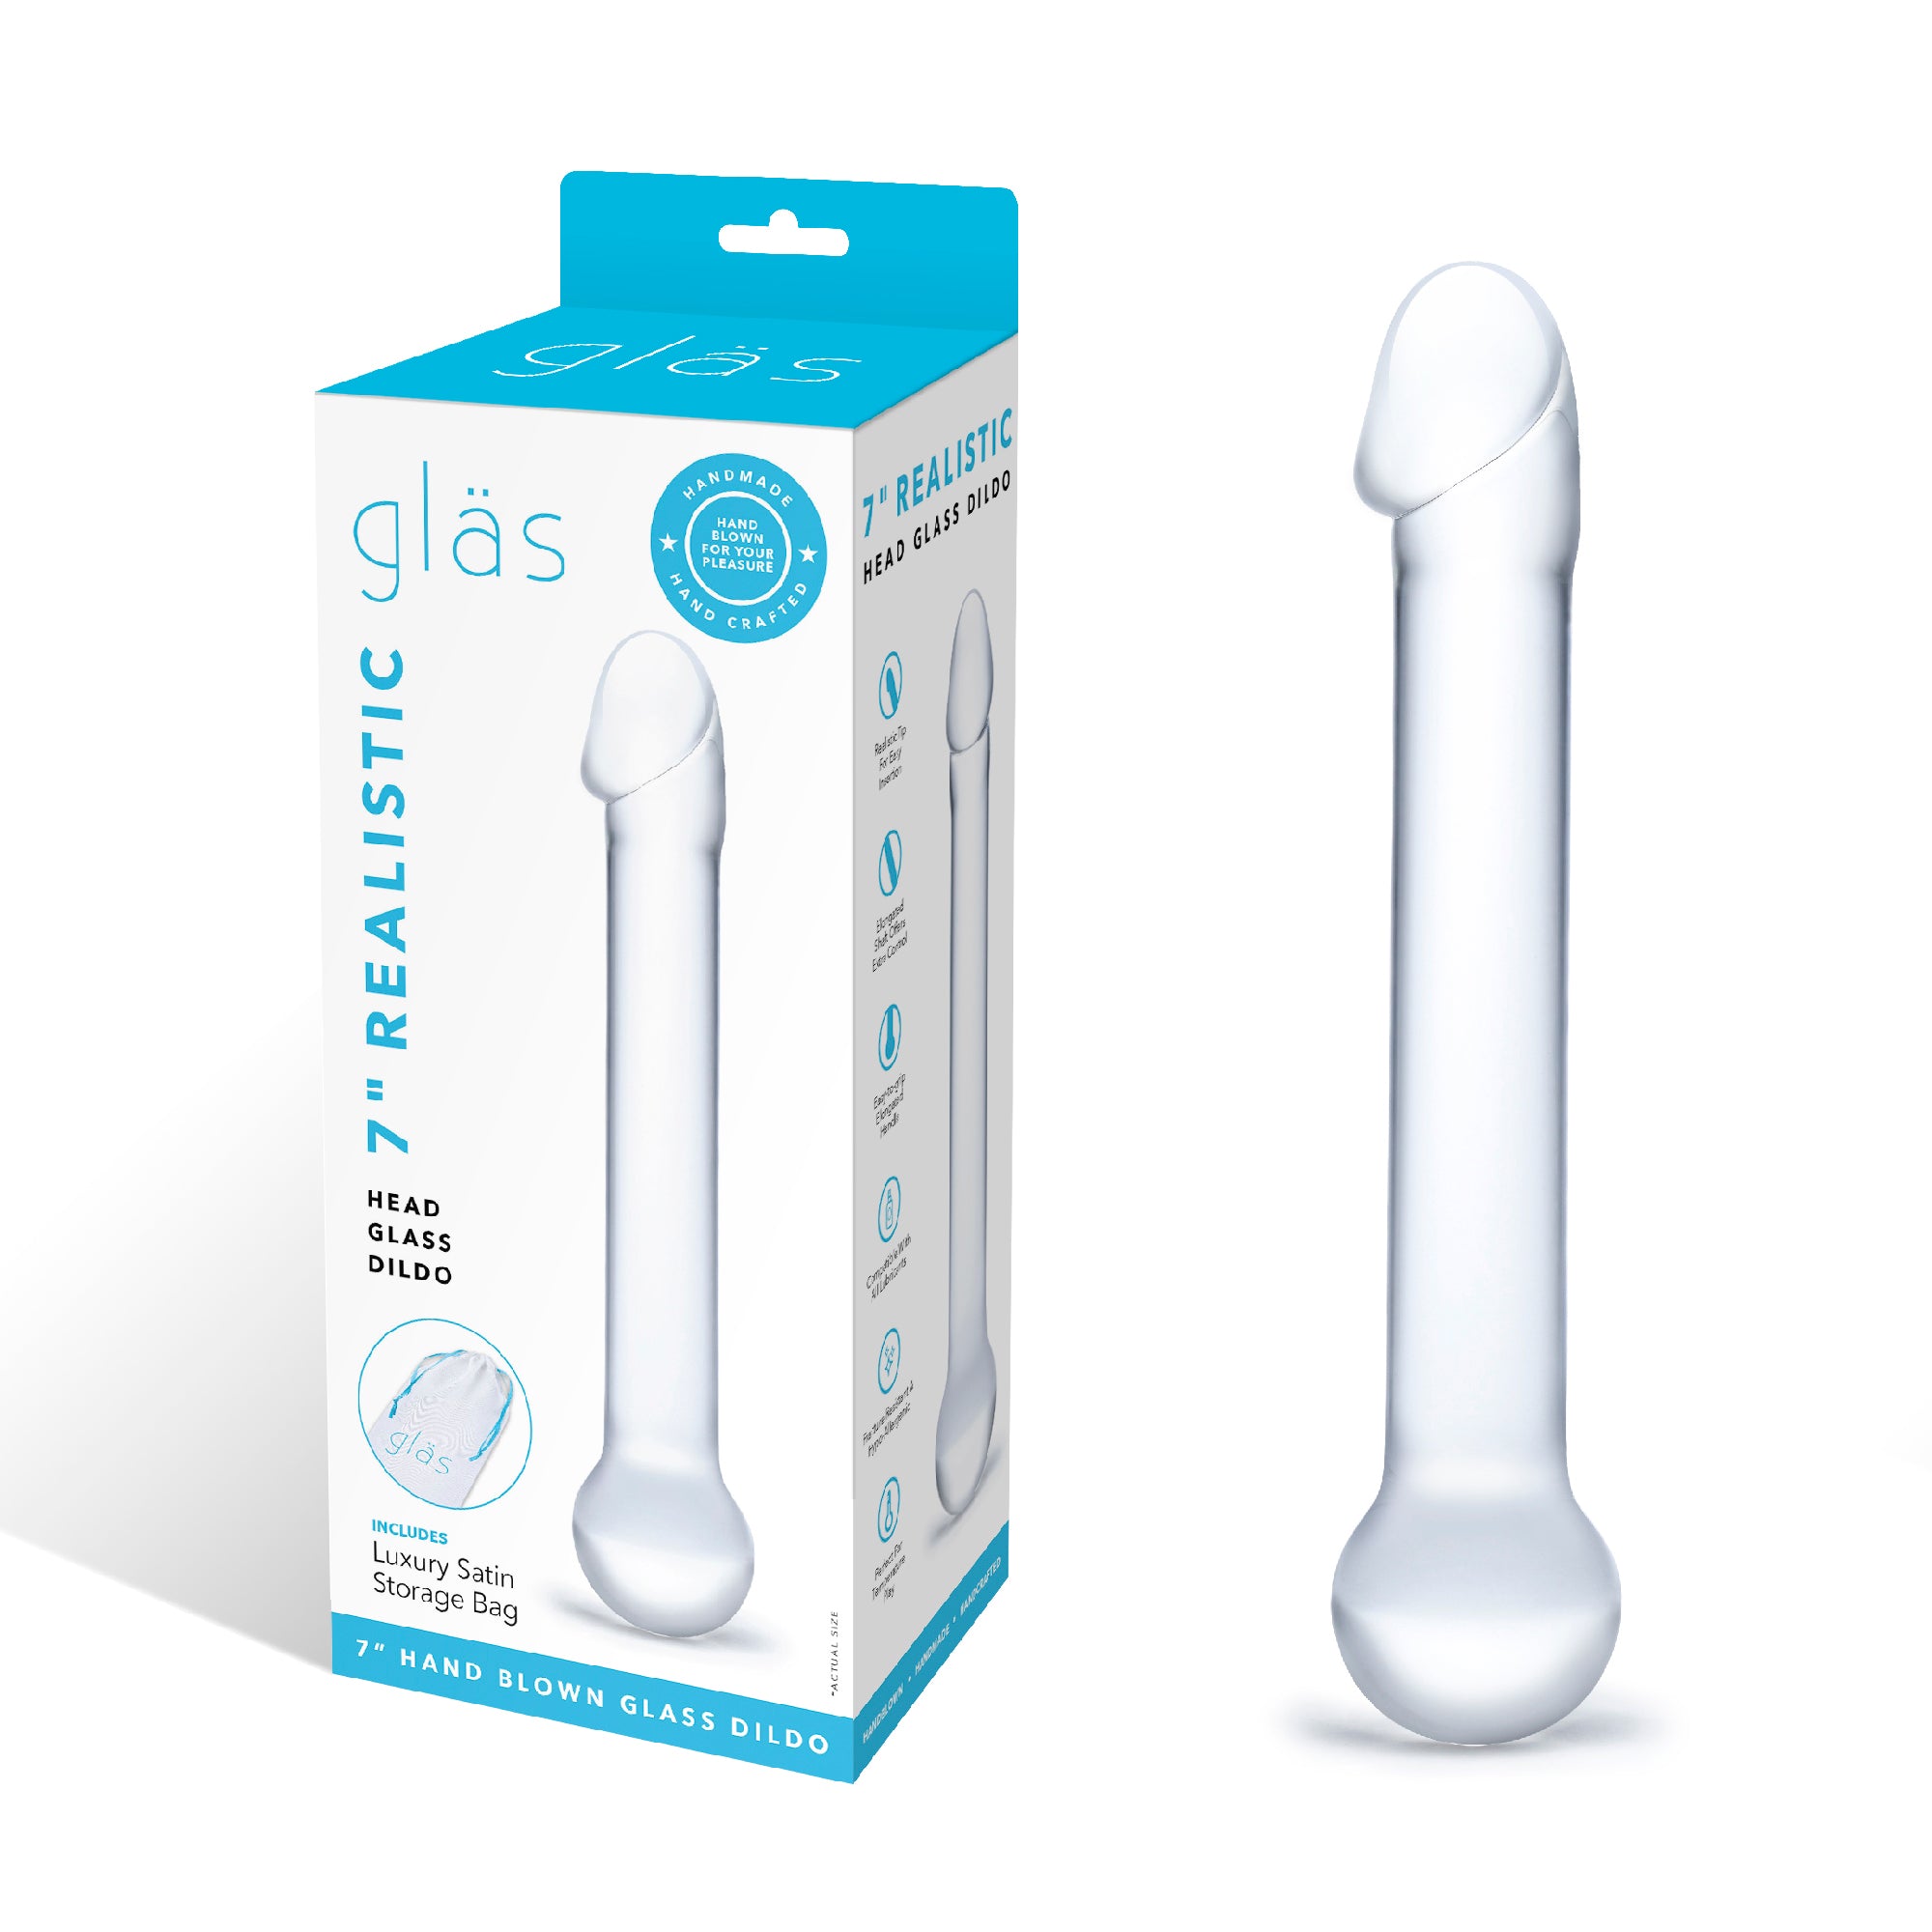 Packaging of the Gläs 7 inch Realistic Head Glass Dildo